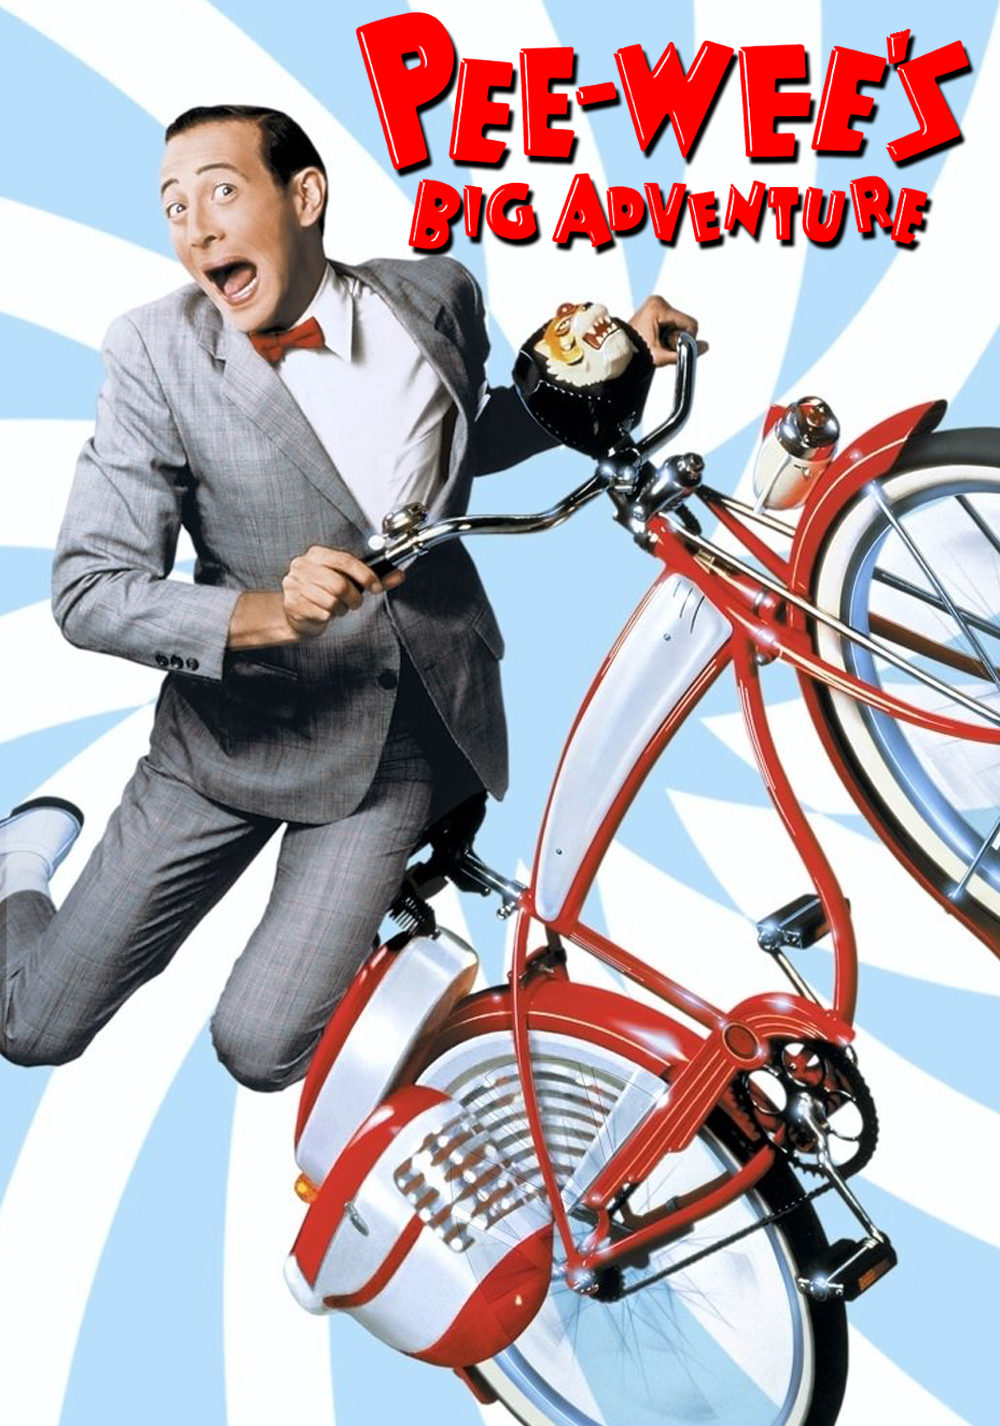 Pee-wee's Big Adventure Poster for Family Movie Night